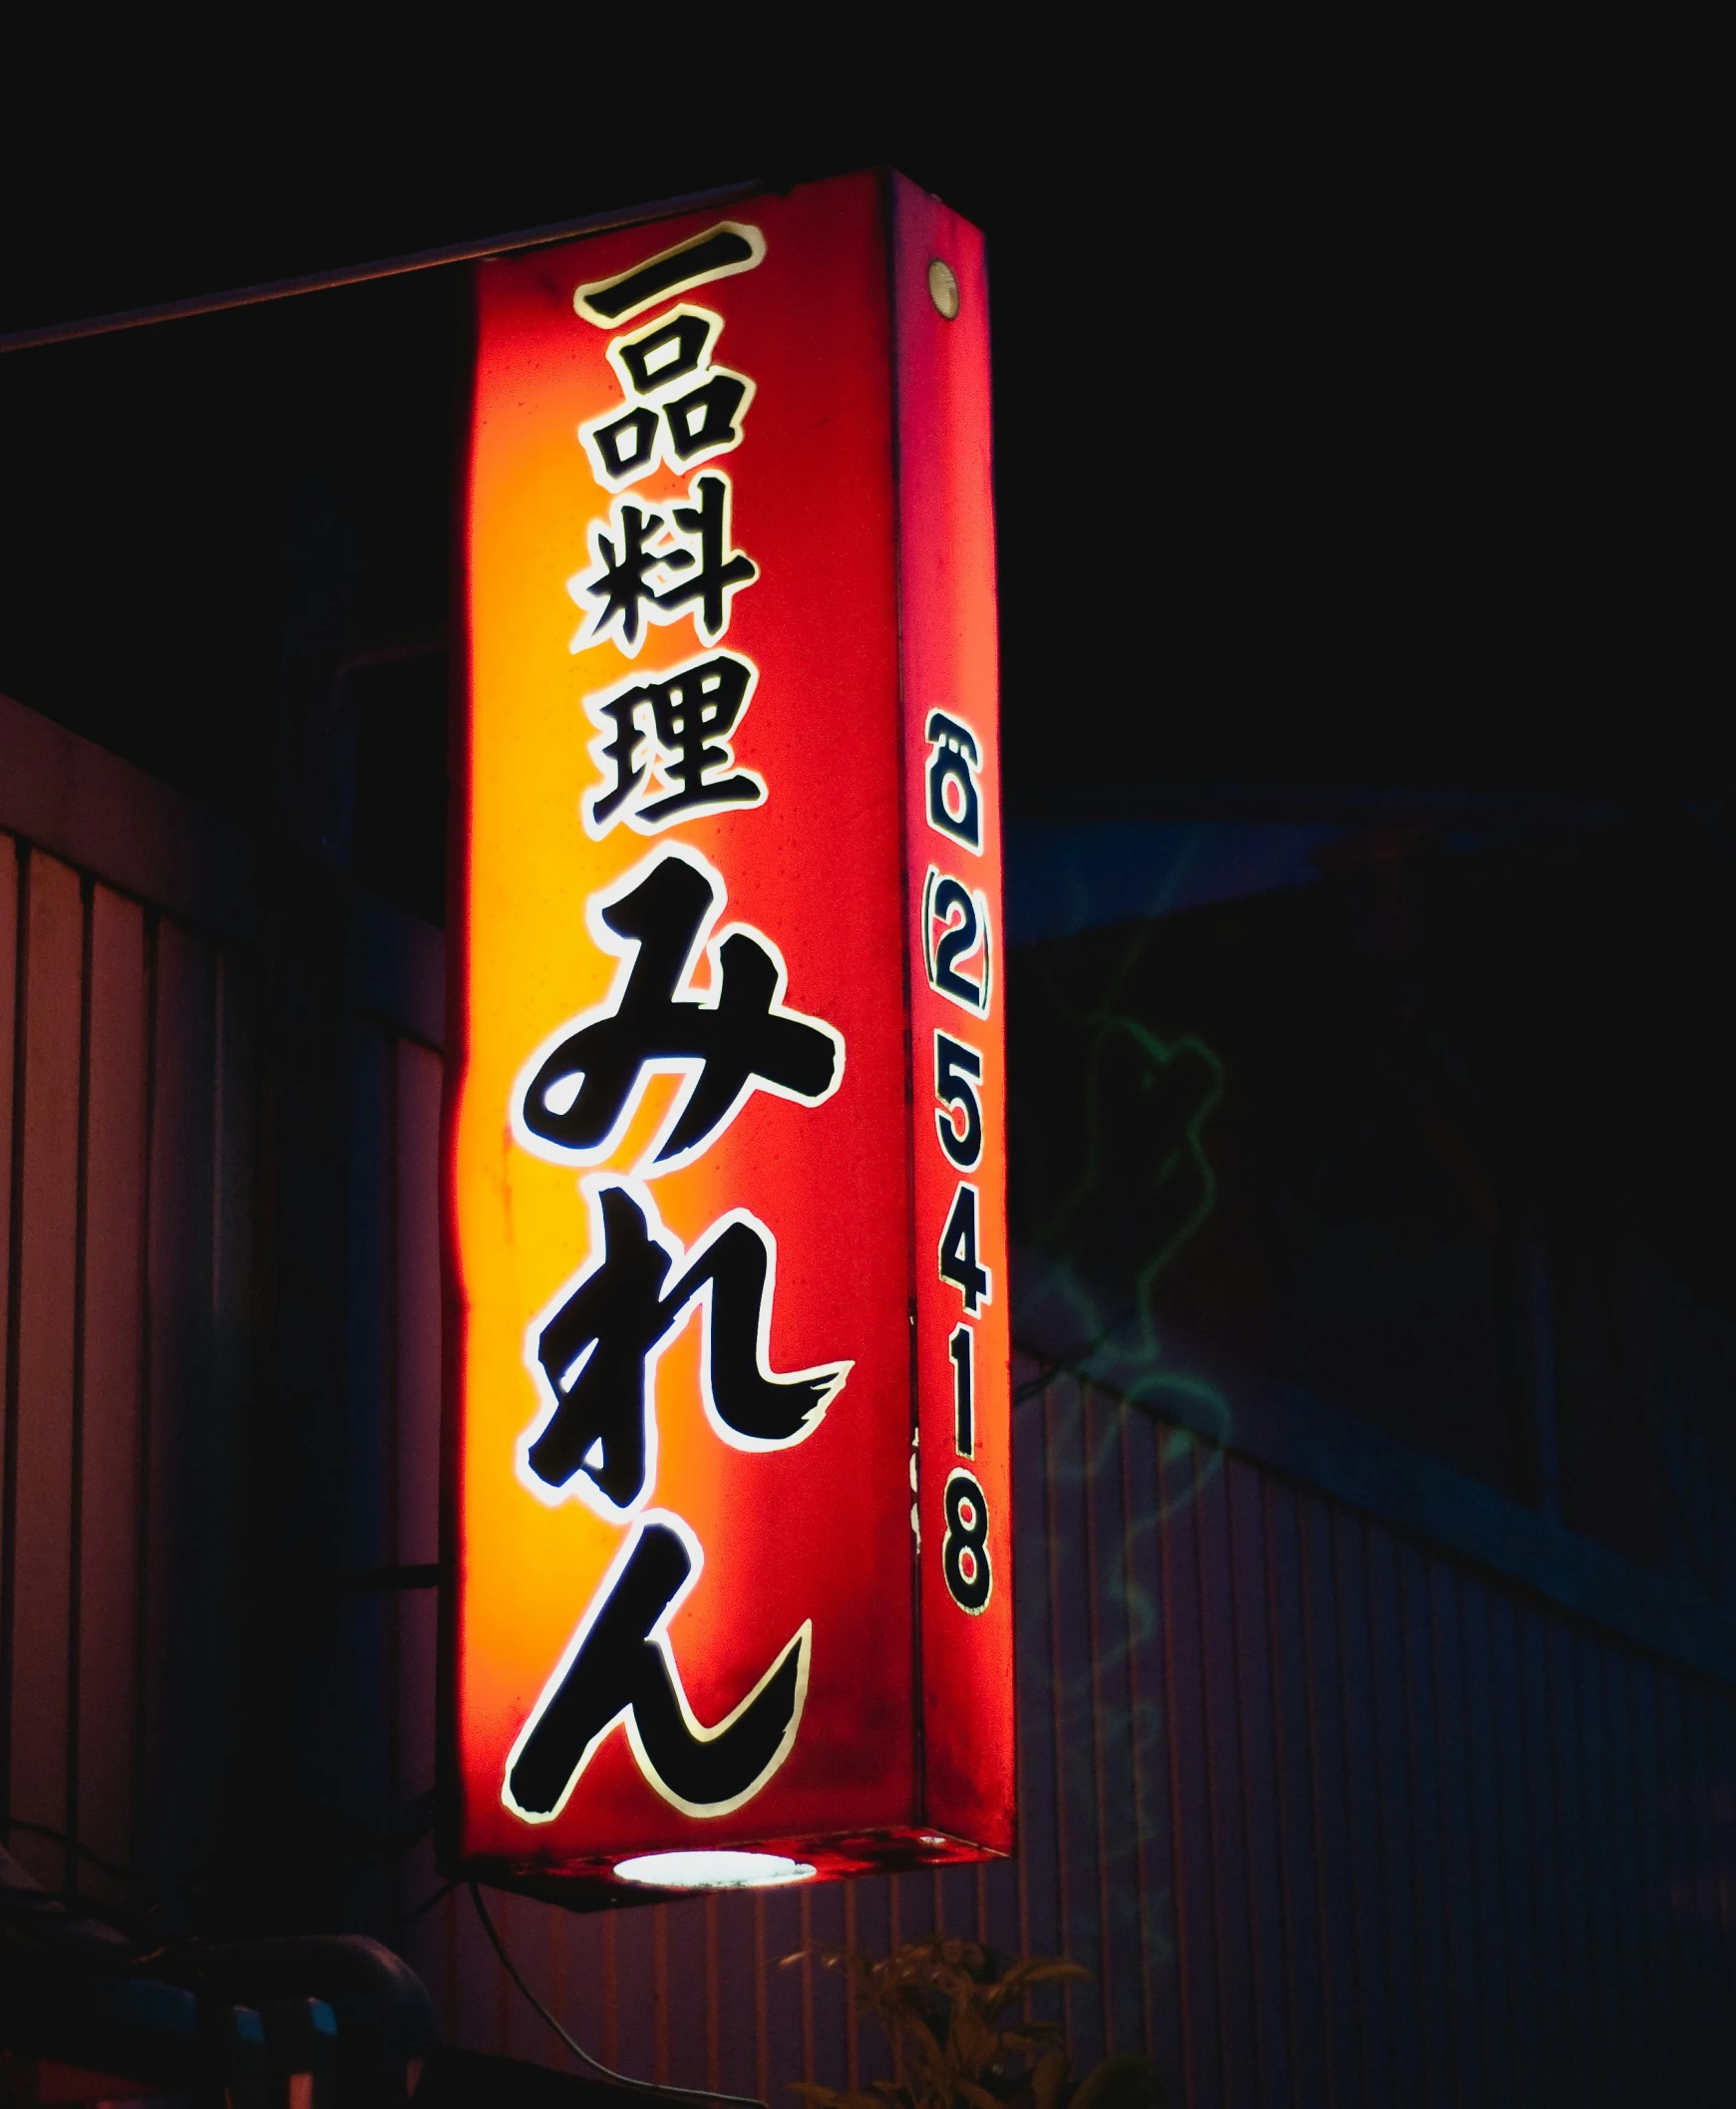 a large lighted sign advertising some asian food